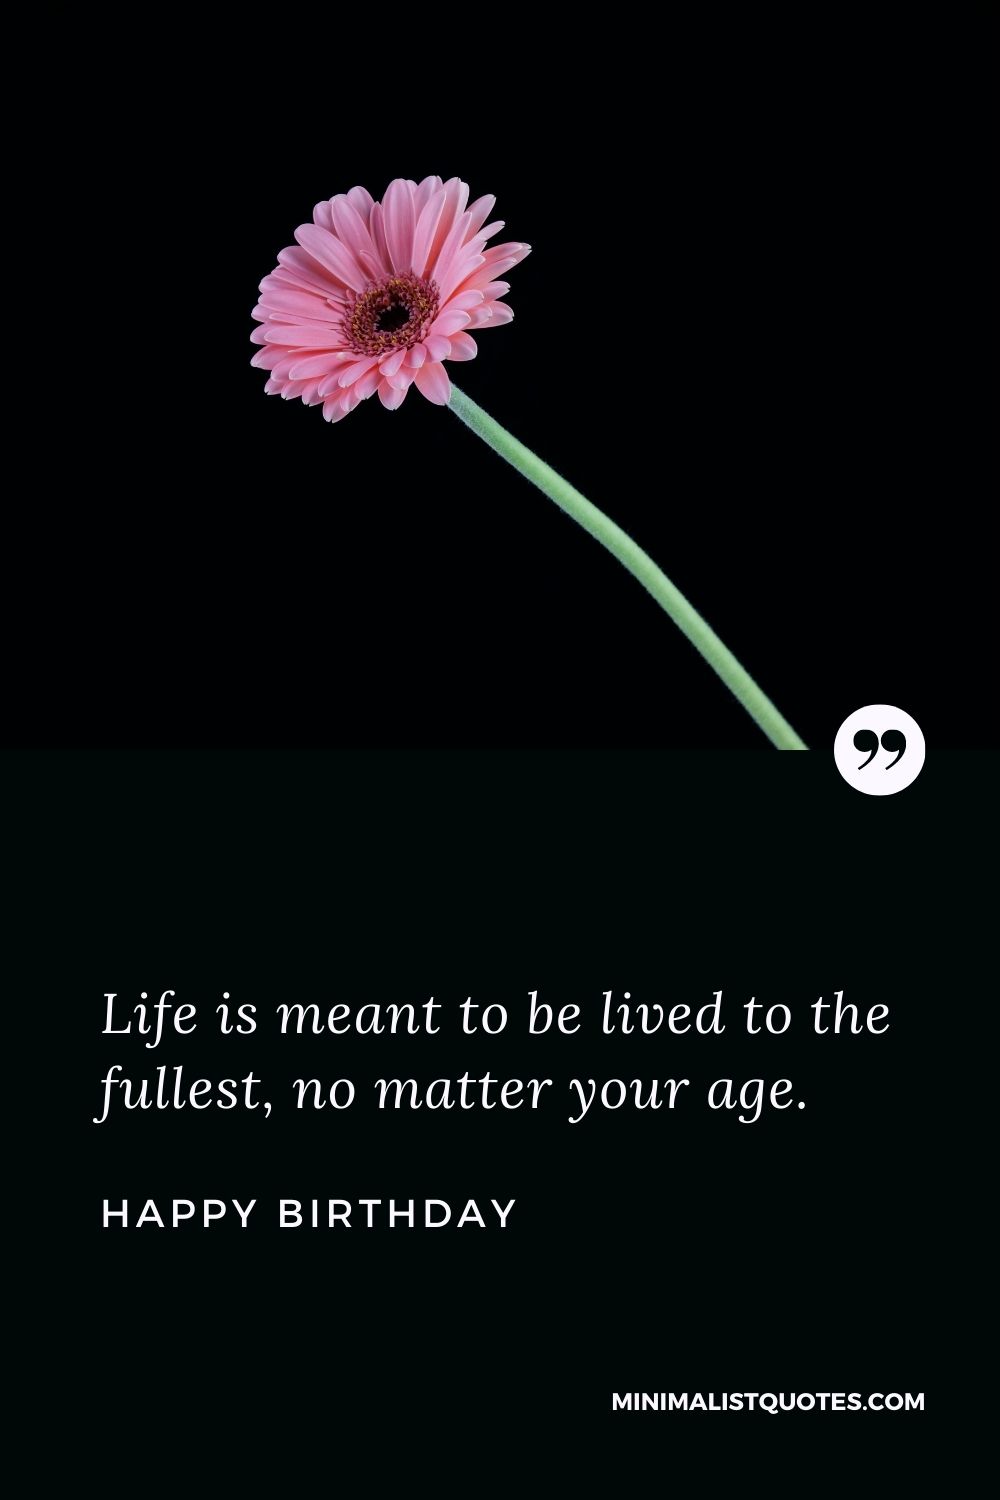 Birthday wishes, messages & quotes with HD images: Life is meant to be lived to the fullest, no matter your age. Happy Birthday!